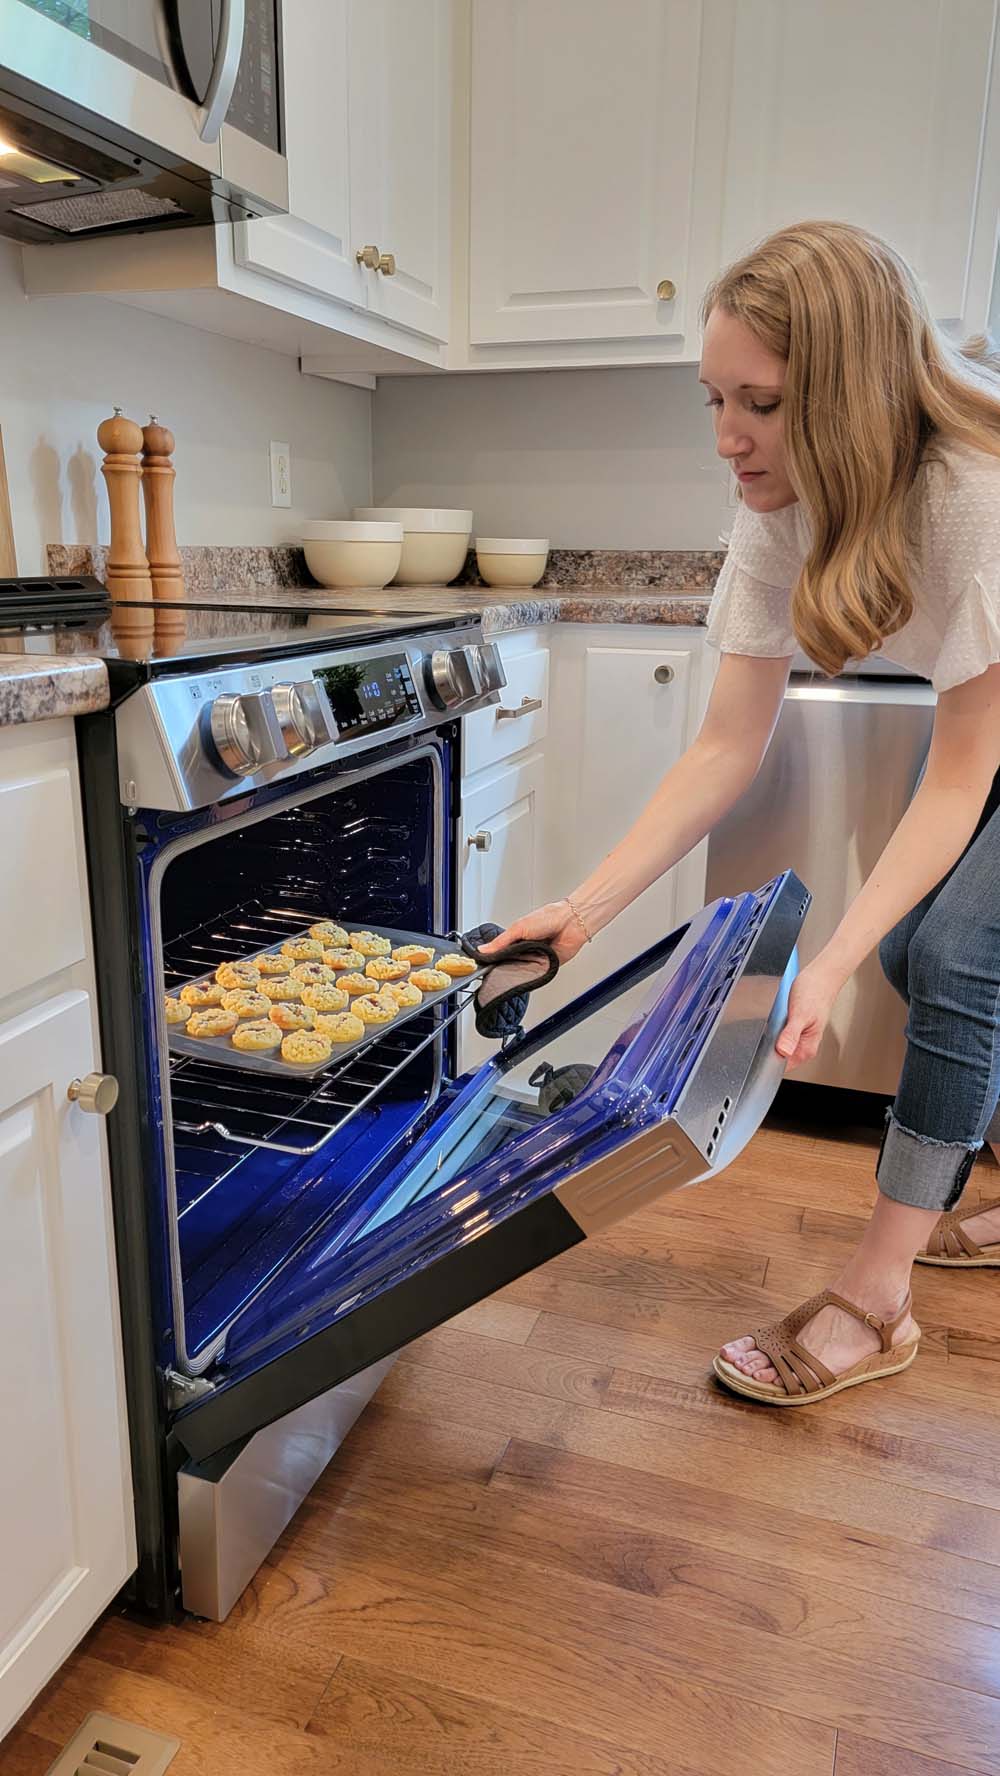 Cookies being taken out of the oven by a woman.